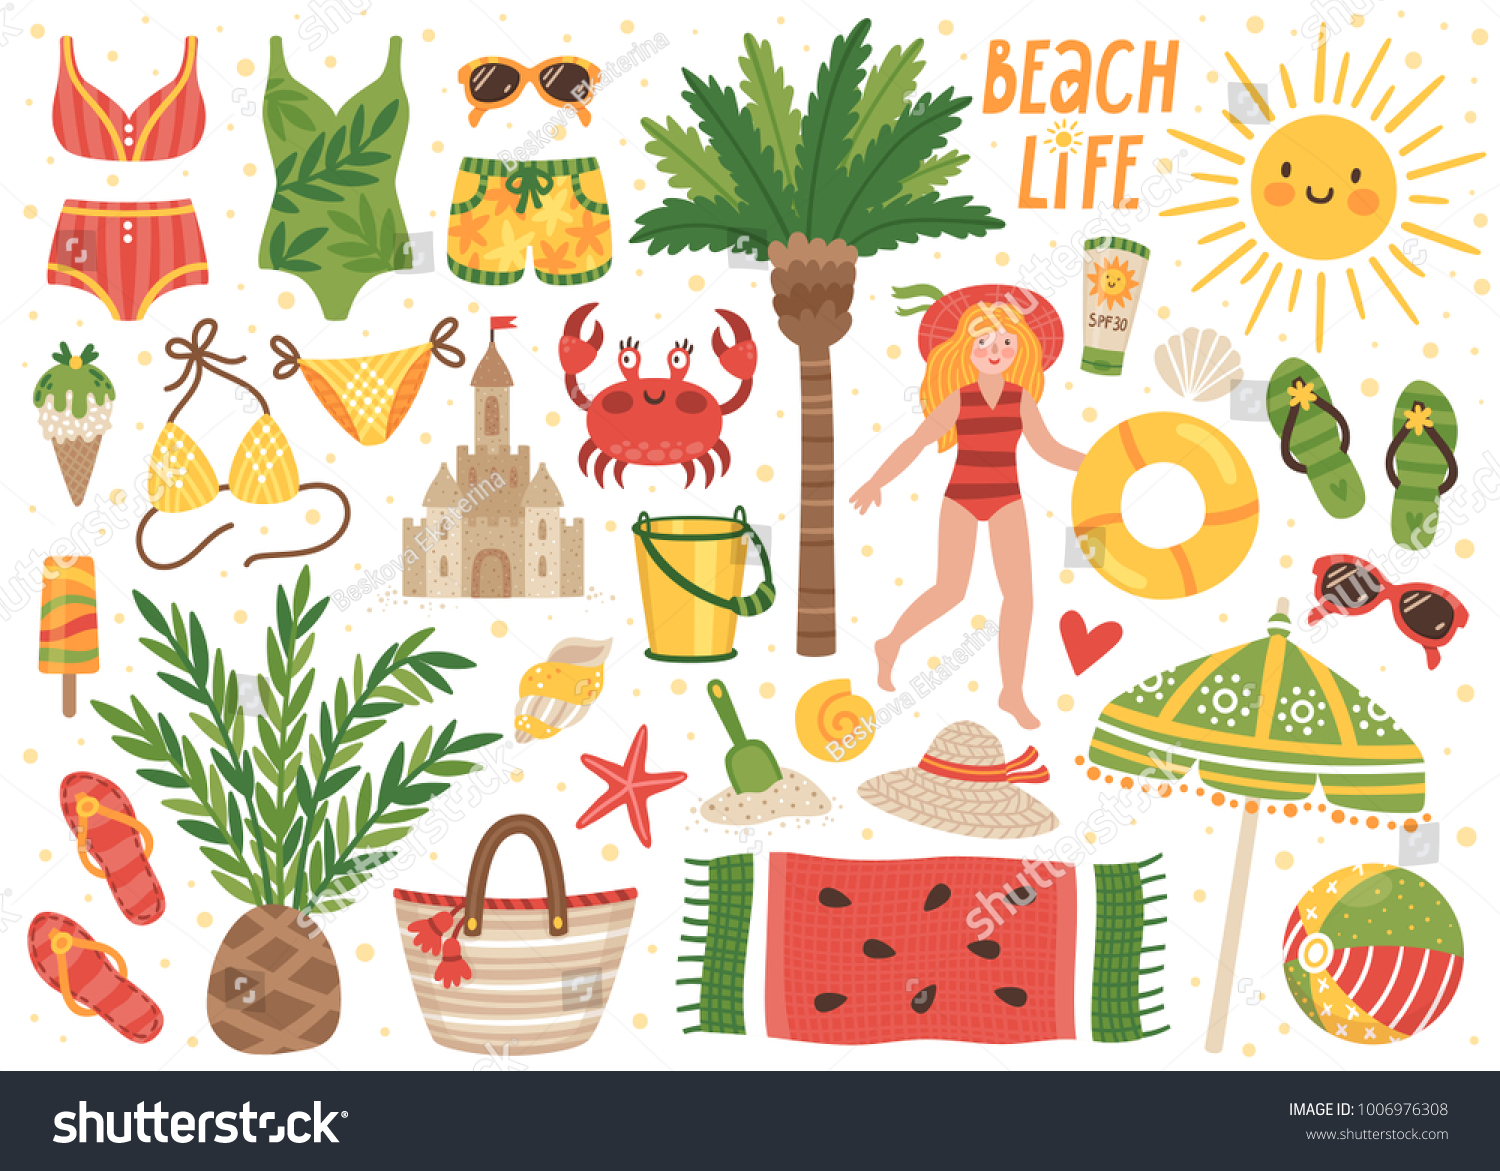 SVG of Set of cute summer icons: bikini, flip flops, beach umbrella, towel, ball, sand castle, palms, girl with life buoy, sun. Bright summertime poster. Collection of scrapbooking elements for beach party. svg